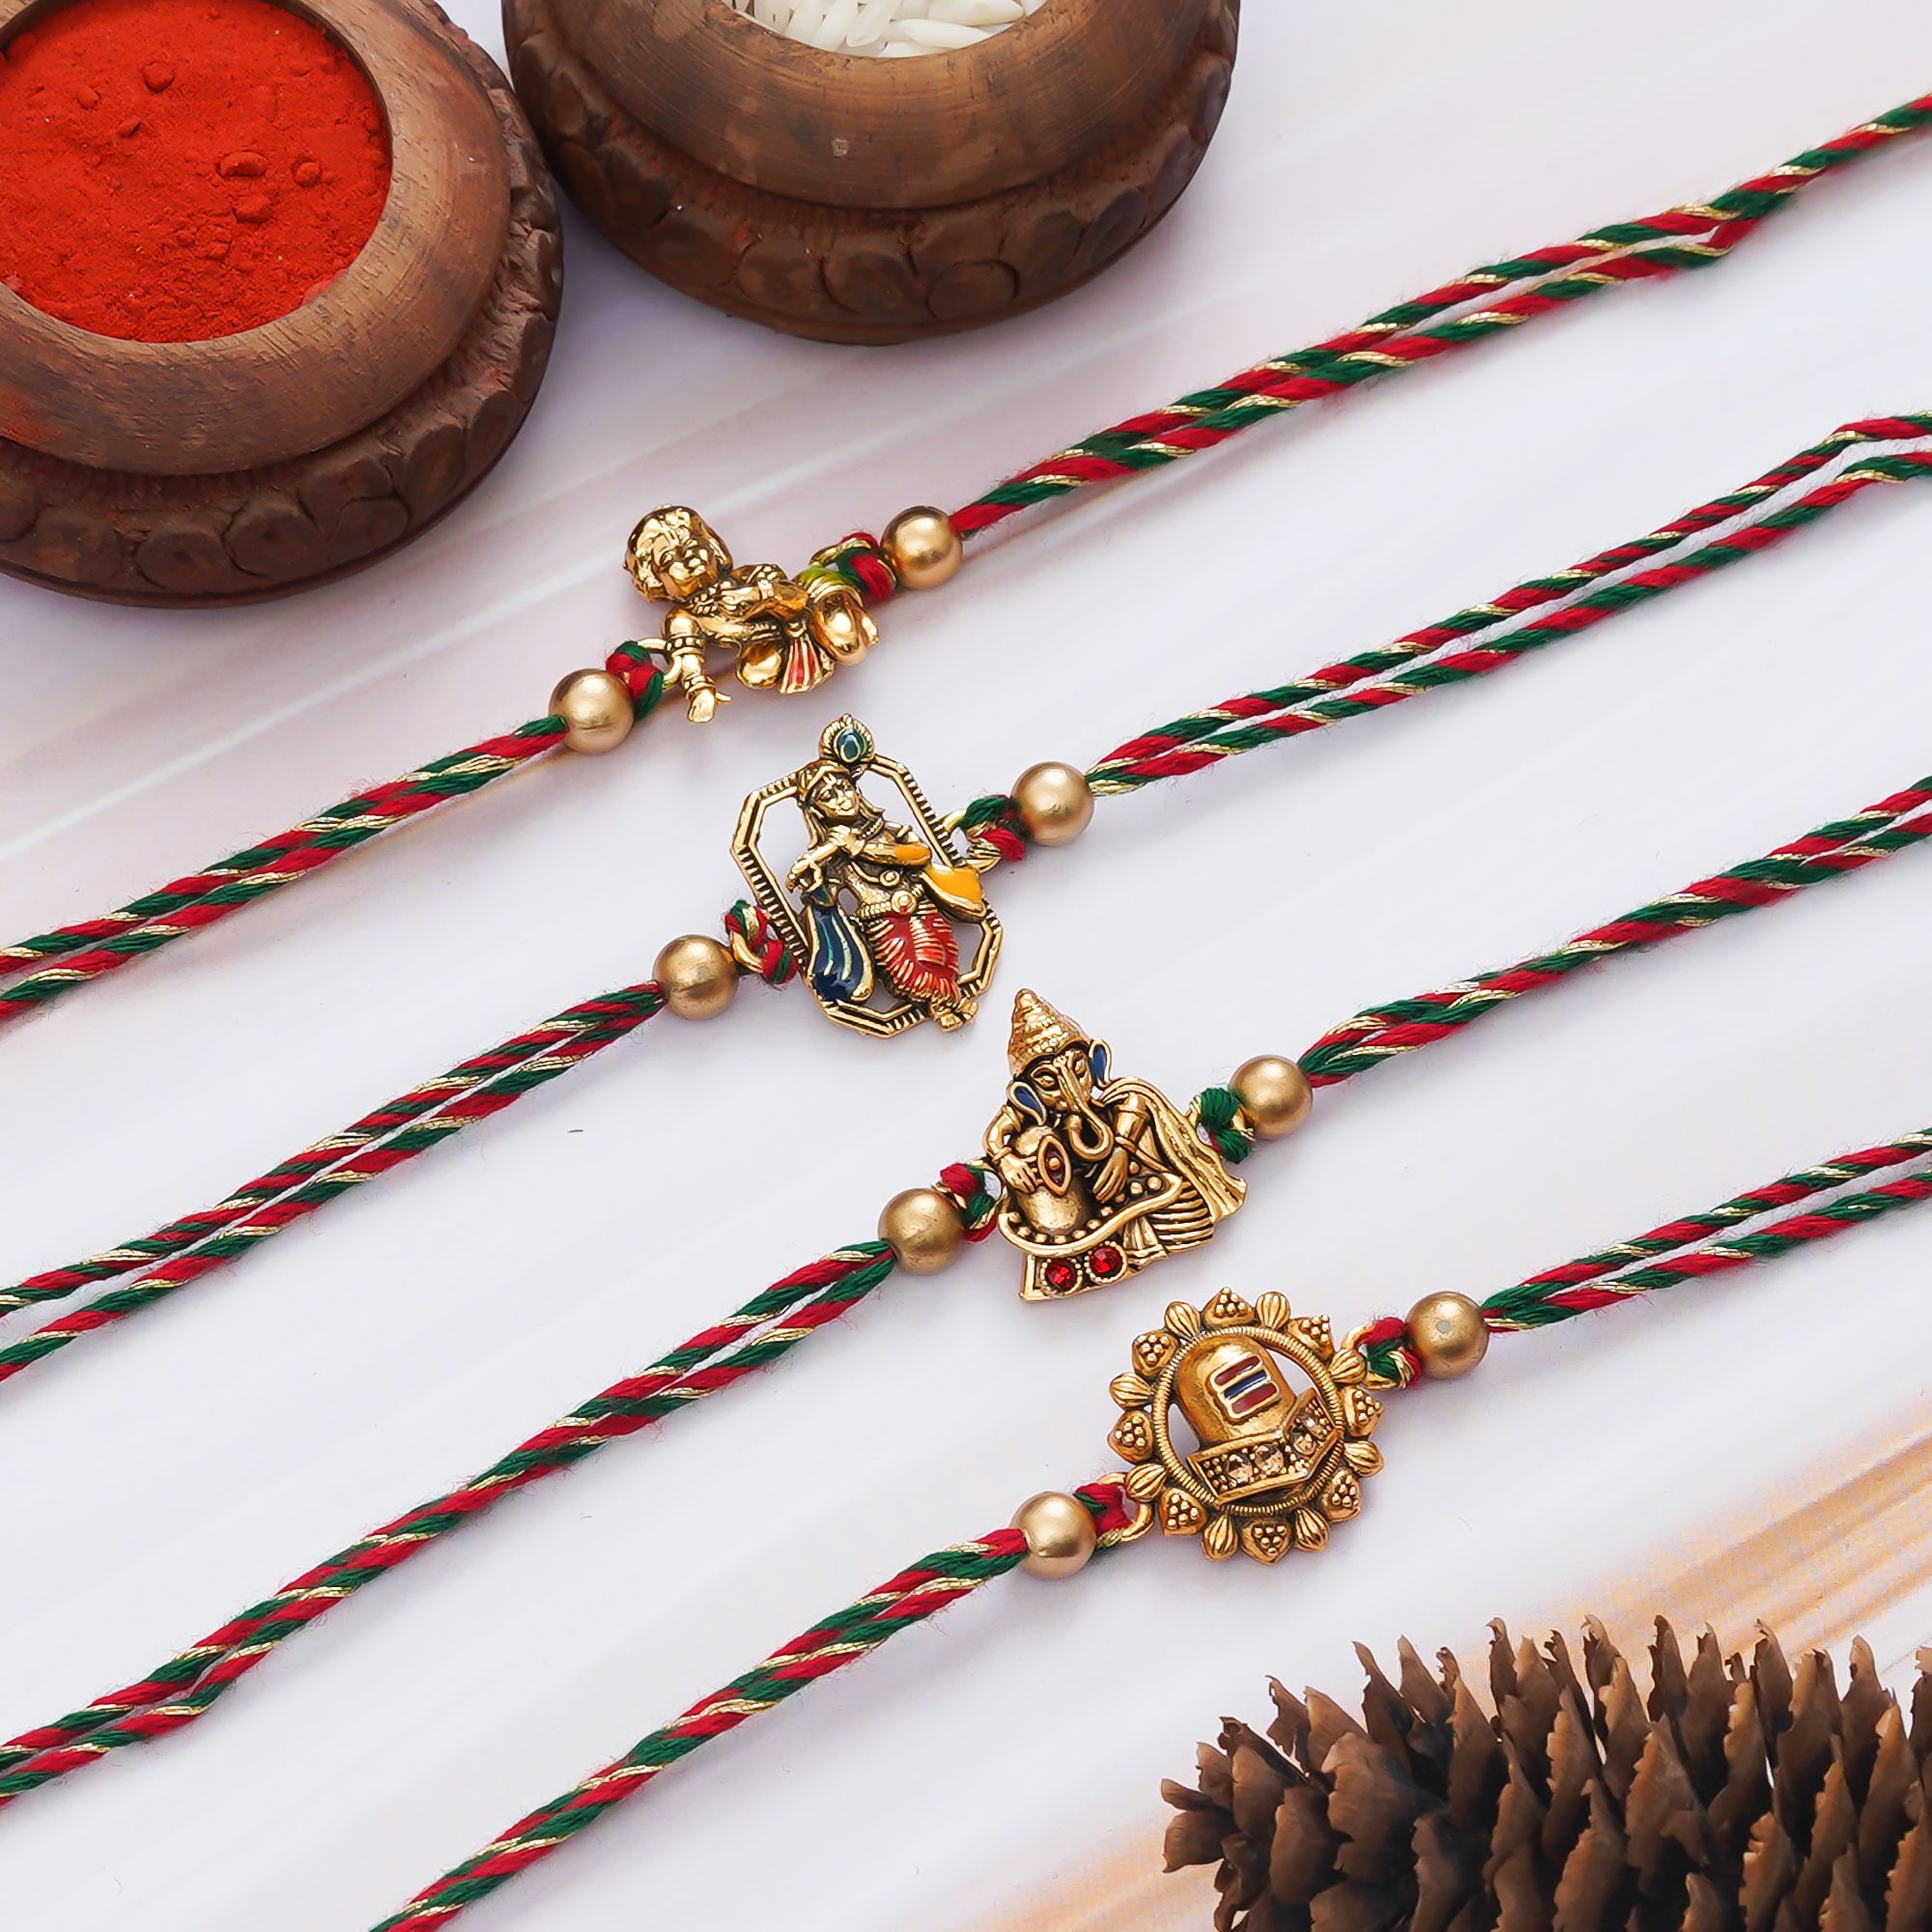 eCraftIndia Set of 4 Golden Laddu Gopal, Lord Krishna Playing Flute, Lord Ganesha, and Shivling Religious Rakhis with Green Red Threads, and Roli Chawal Pack